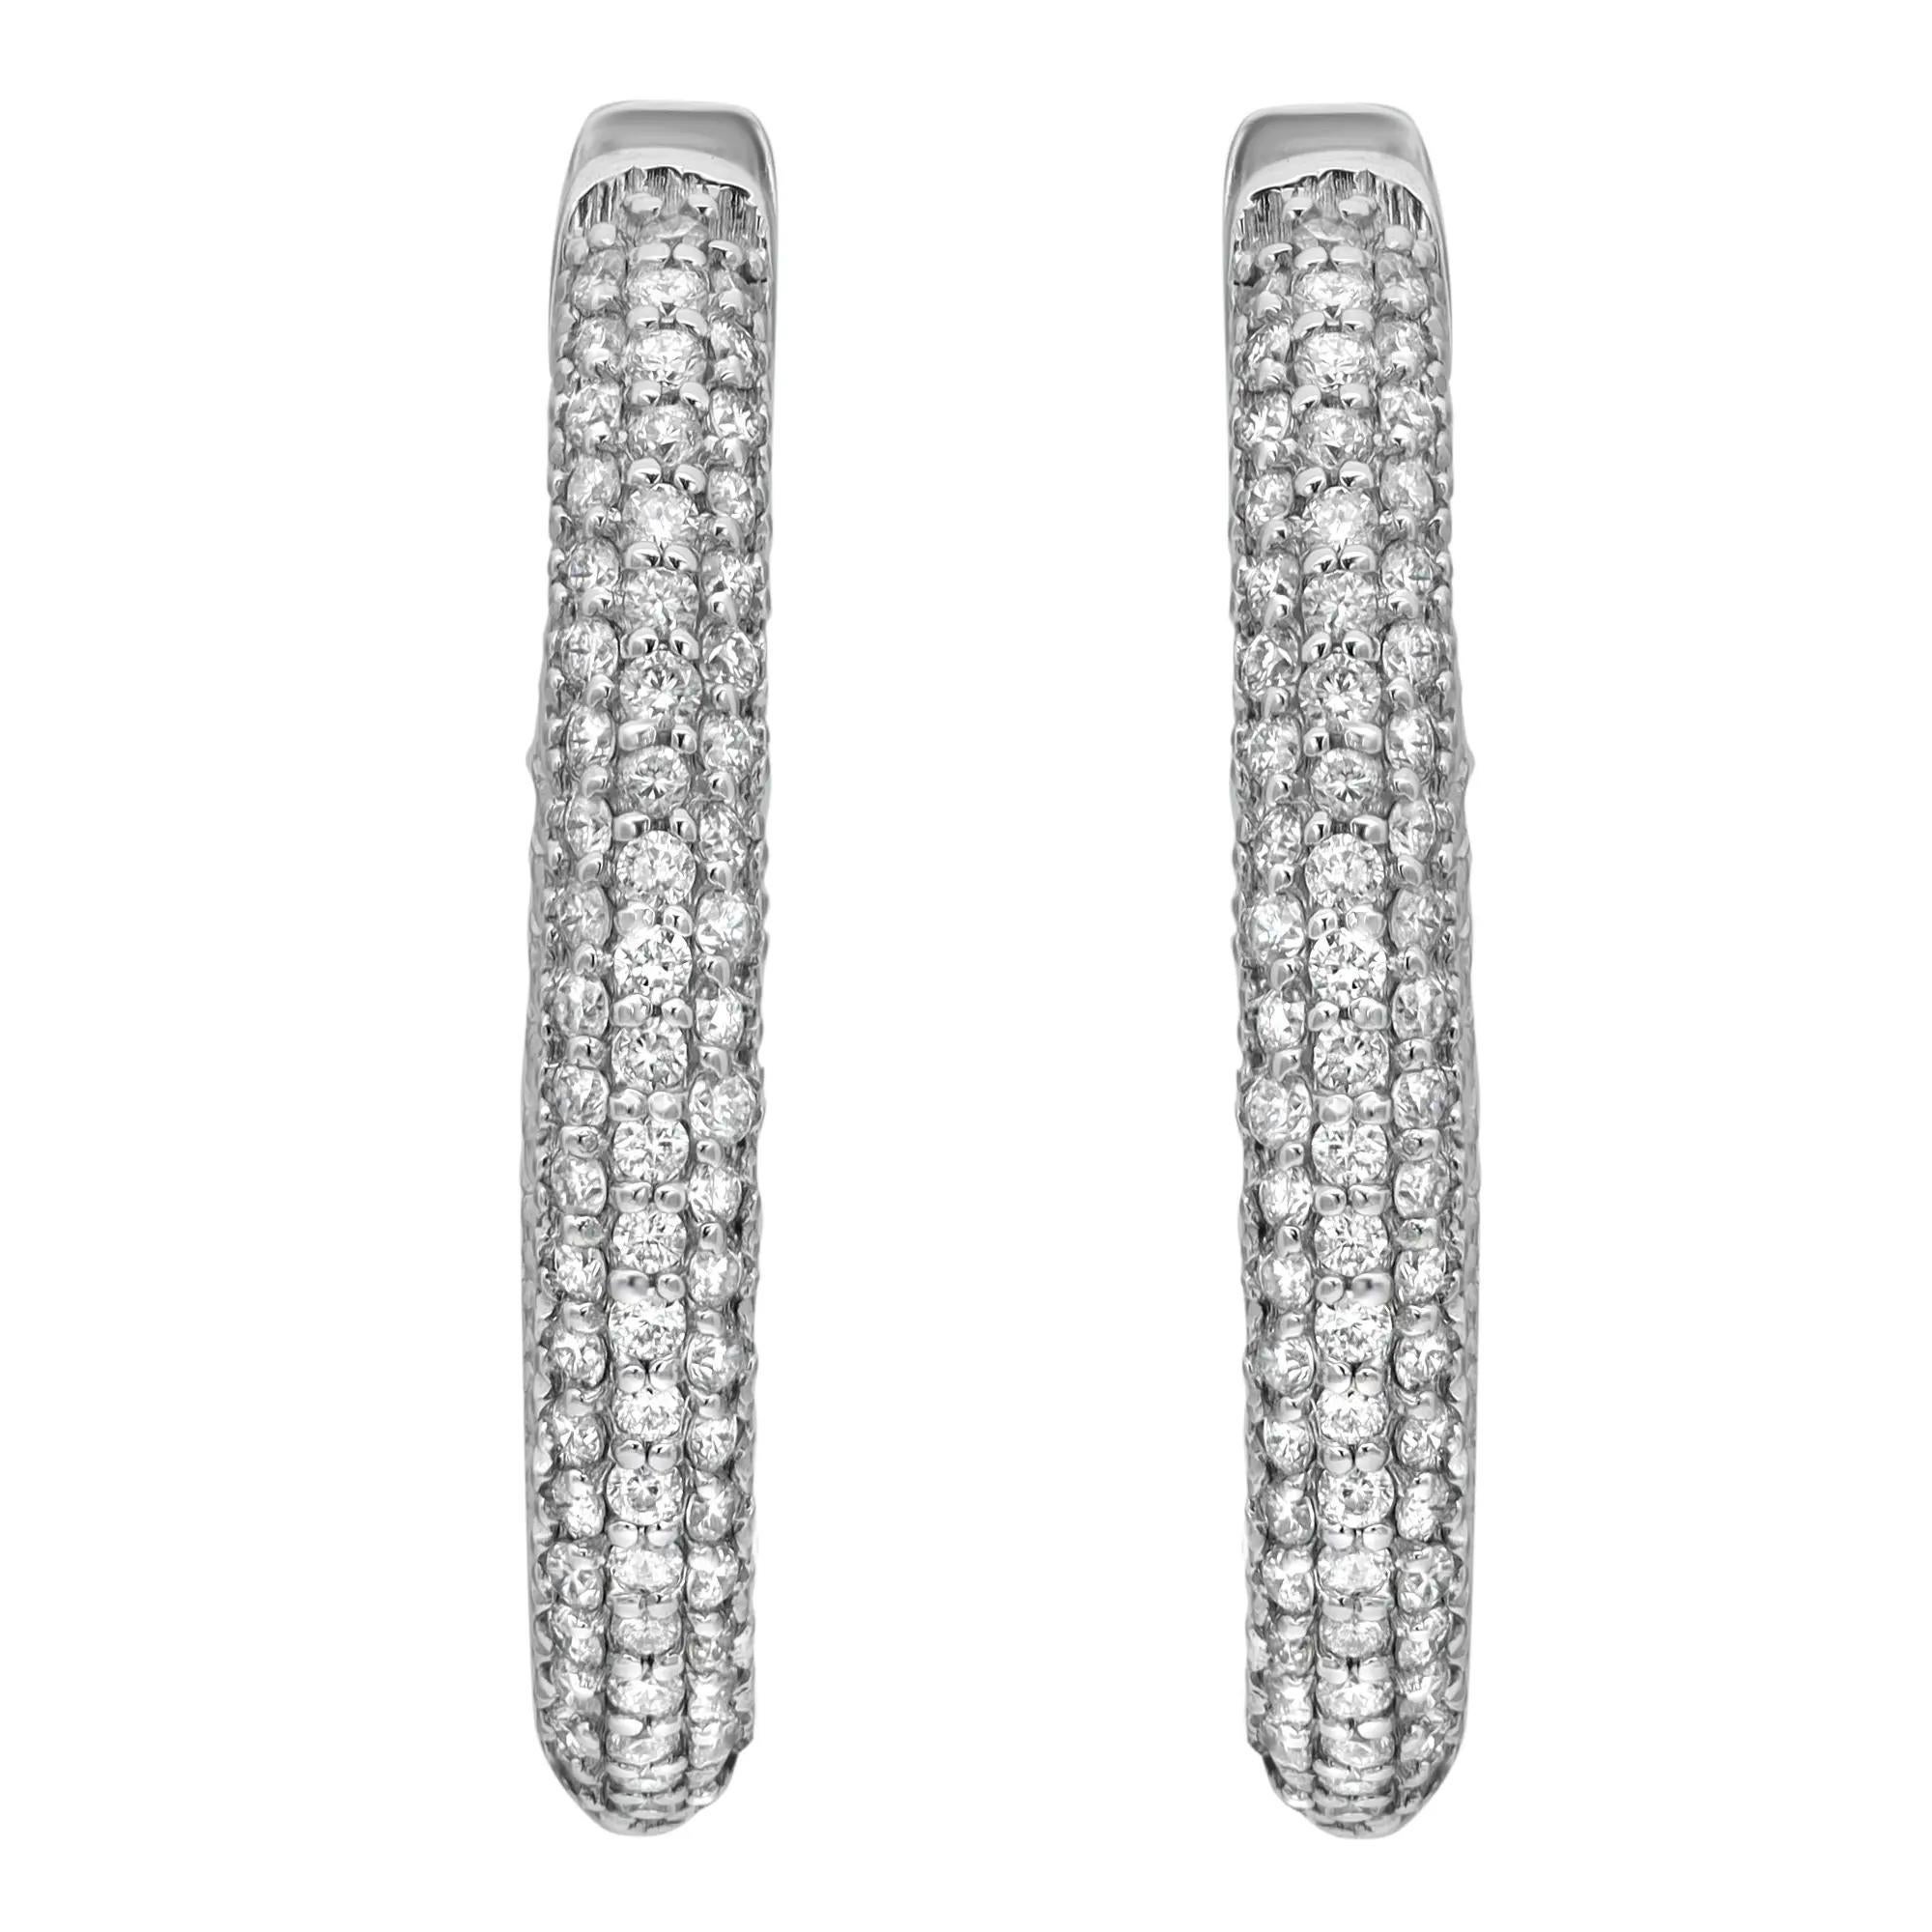 These stylish and elegant 14k white gold oval shaped hoop earrings feature pave set shimmering round cut diamonds. The diamonds embellish these earrings offering a dazzling look. Total diamond weight 1.00 carat. Diamond color G-H and SI clarity.